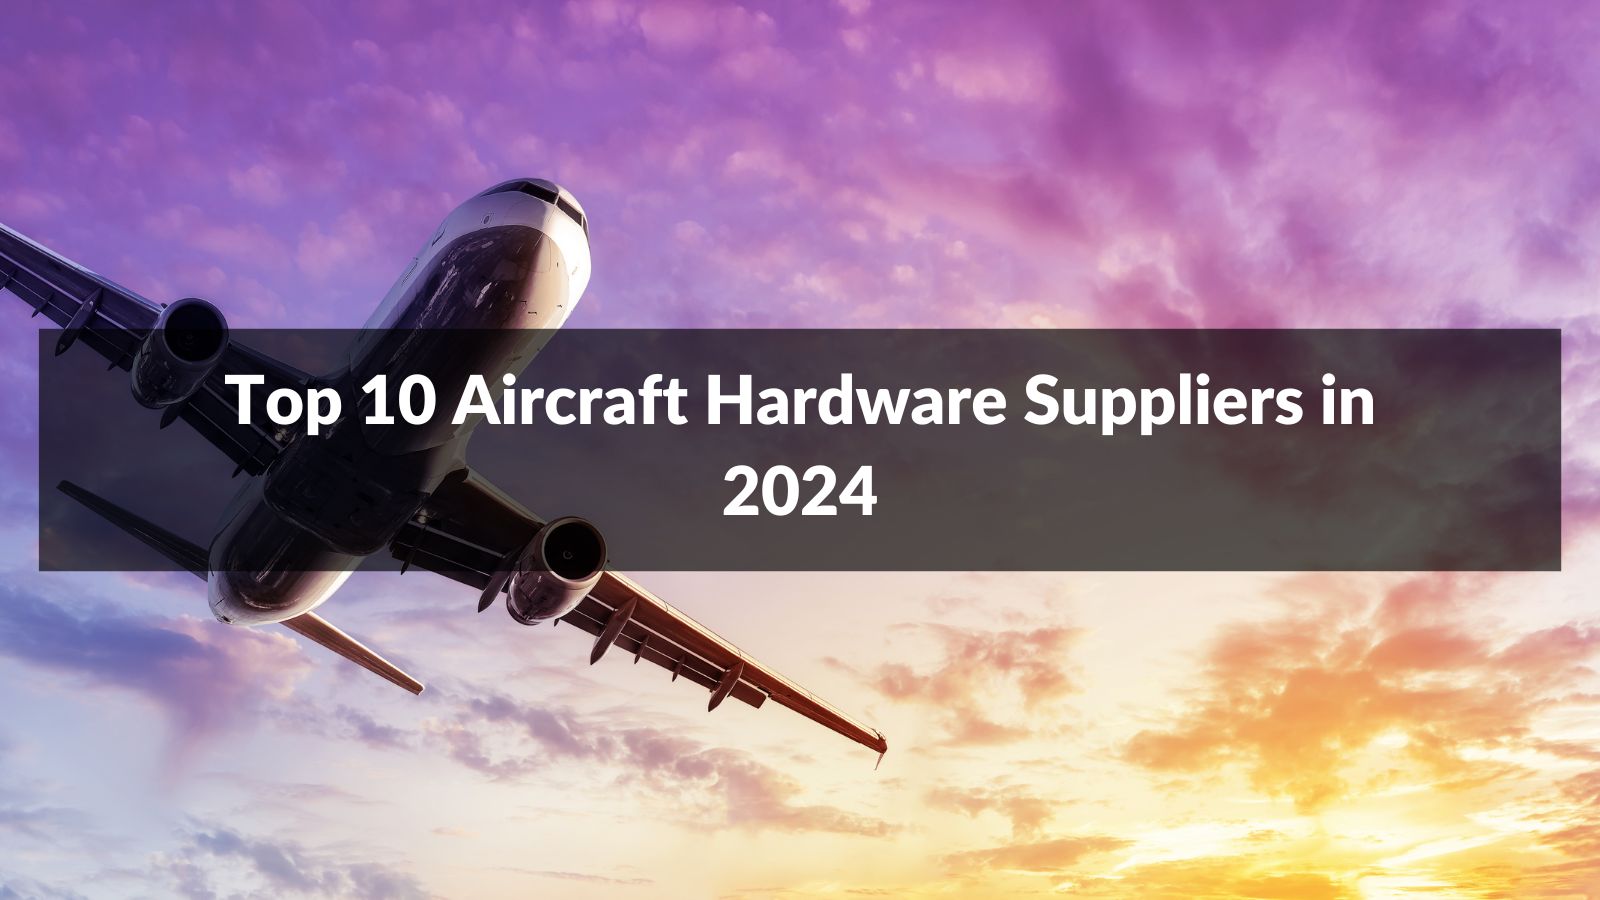 Top 10 Aircraft Hardware Suppliers in 2024